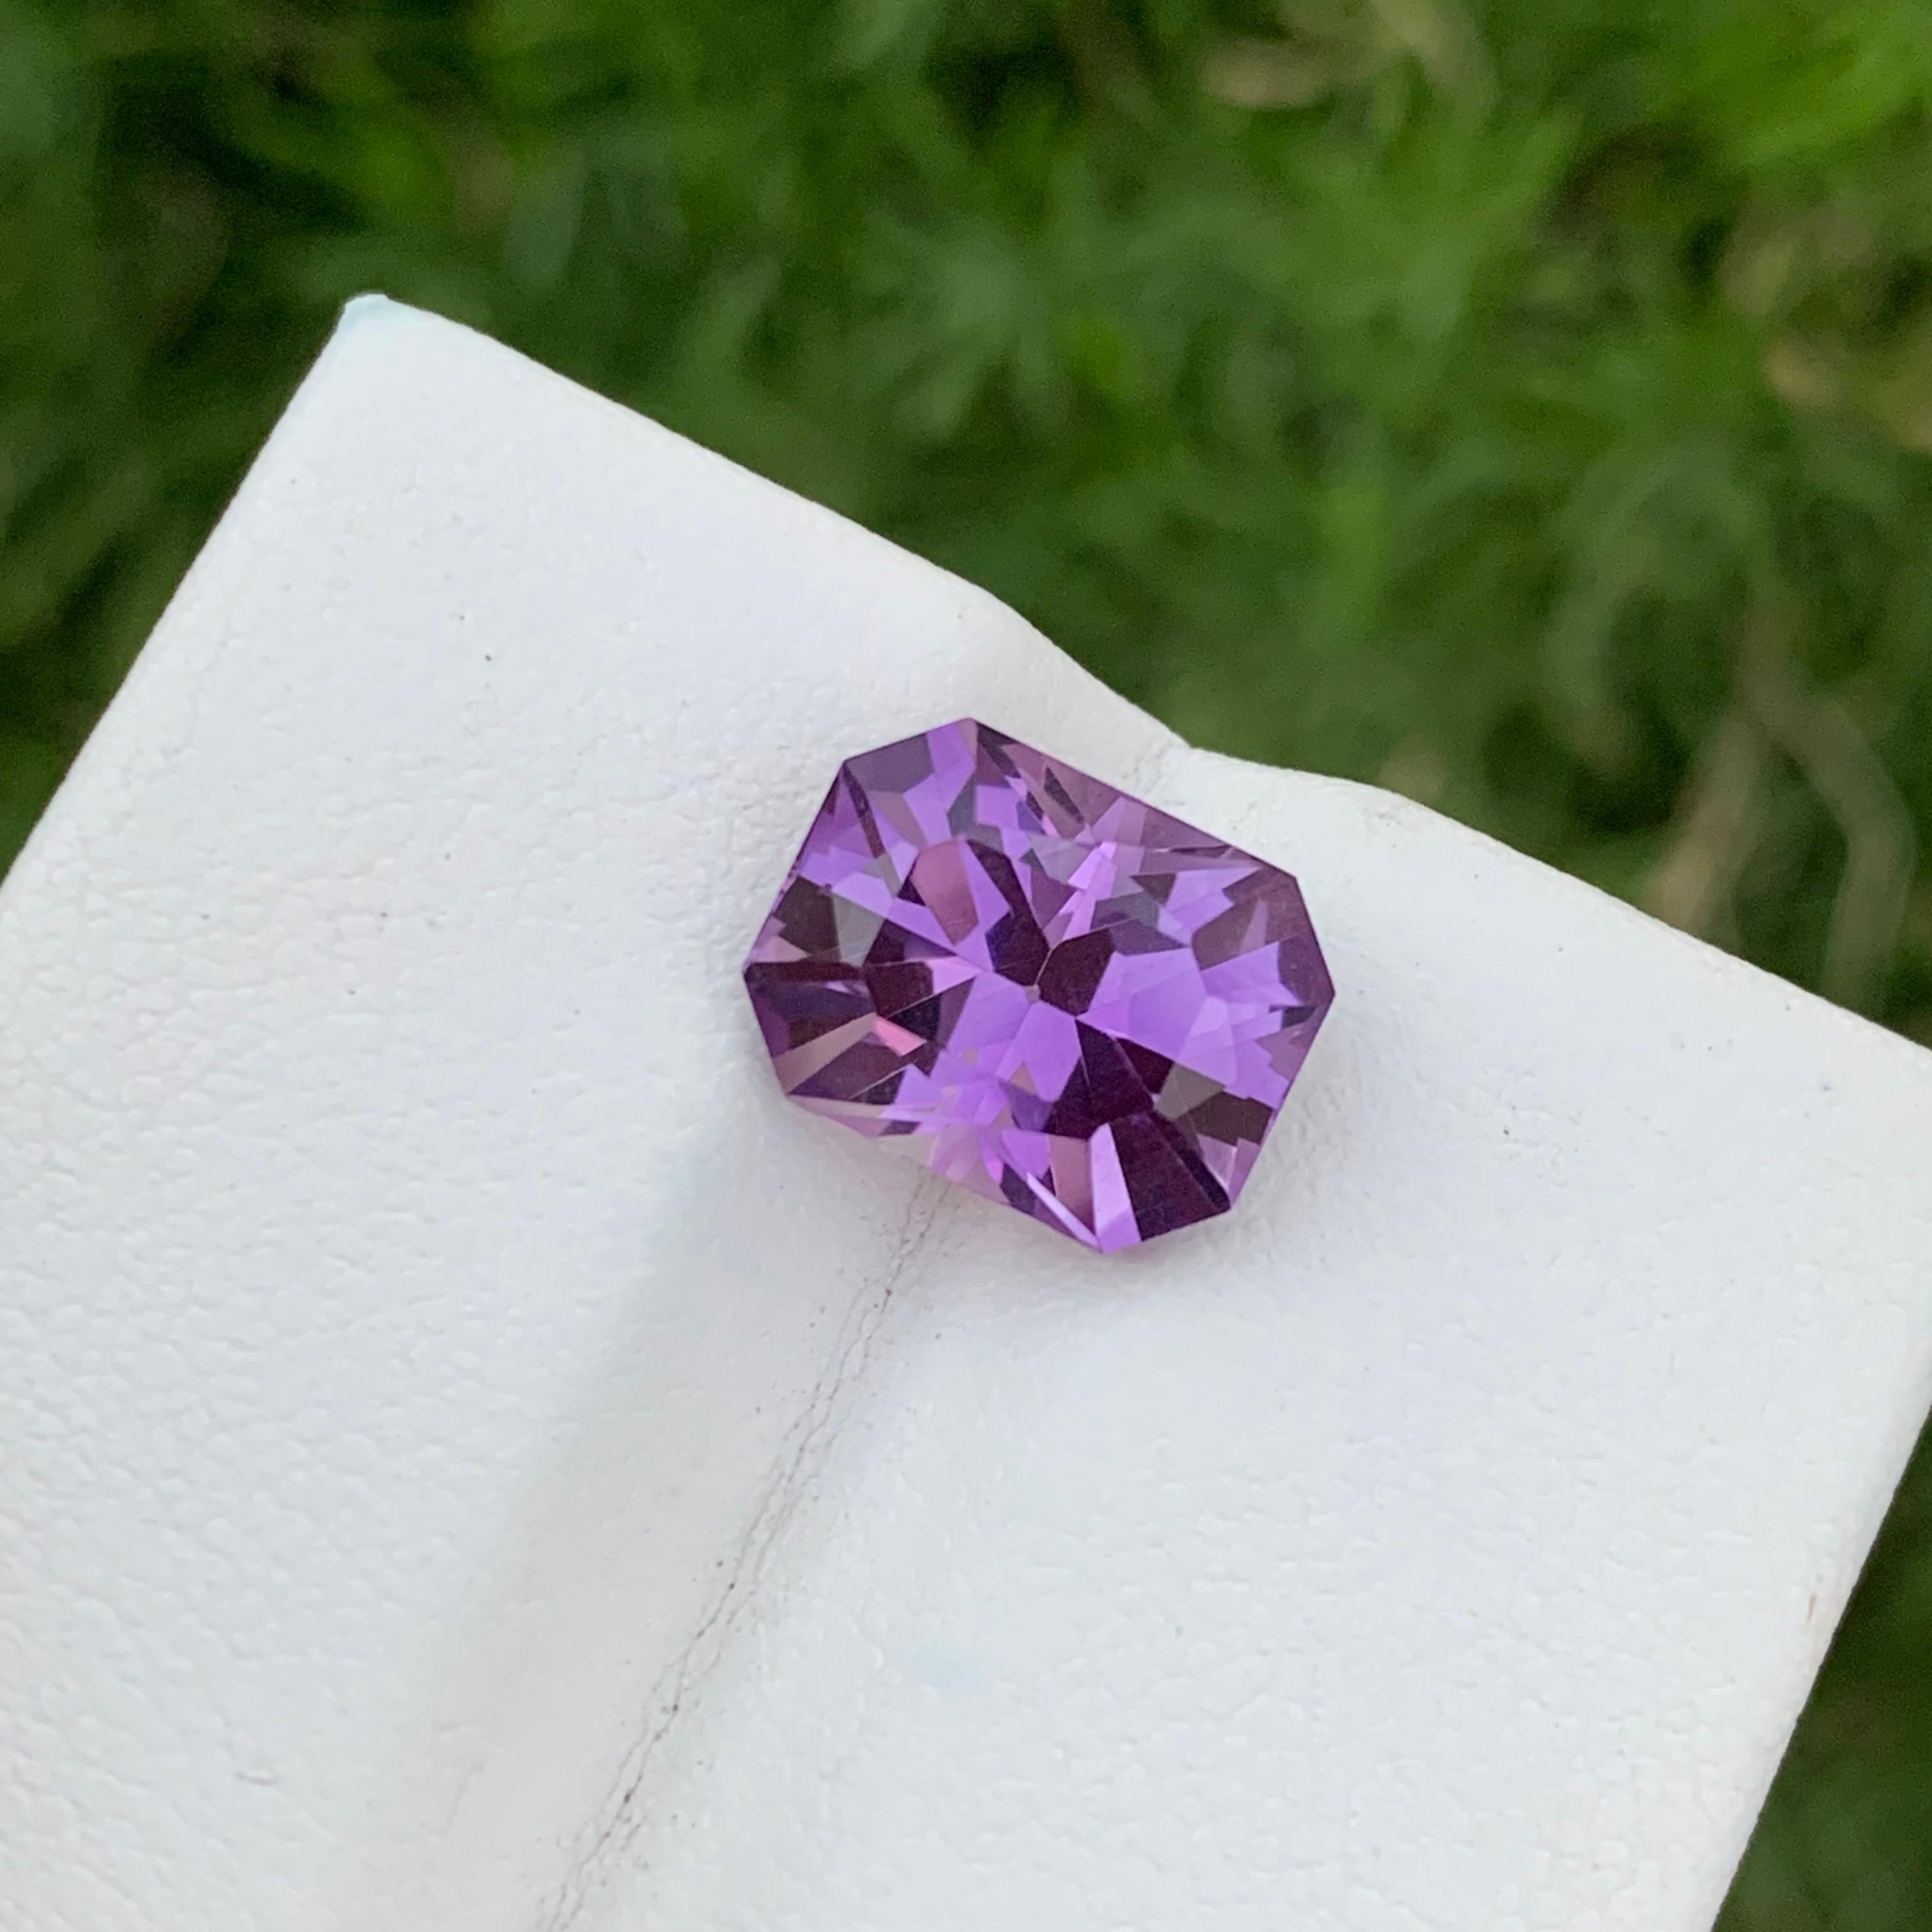 Facet Amethyst 
Weight: 4.70 Carats 
Origin: Brazil
Color: Purple
Dimension: 11.4x8.8x7.6 Mm
Certificate: On Customer Demand
Amethyst is a captivating and widely appreciated gemstone renowned for its striking violet to purple hue. It belongs to the